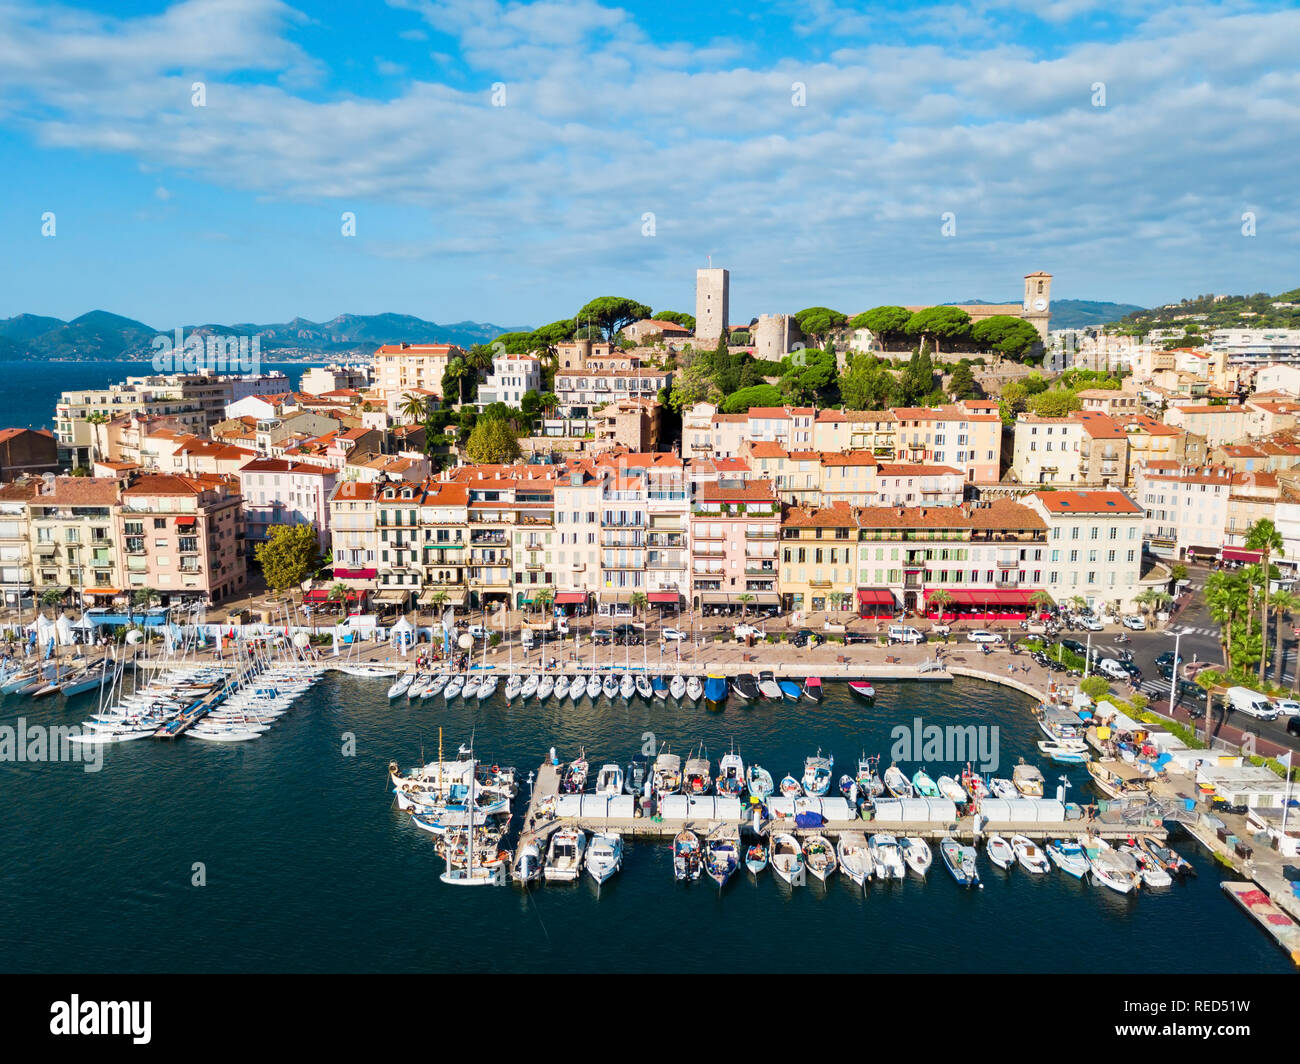 Cannes port aerial panoramic view. Cannes is a city located on the French Riviera or Cote d'Azur in France. Stock Photo